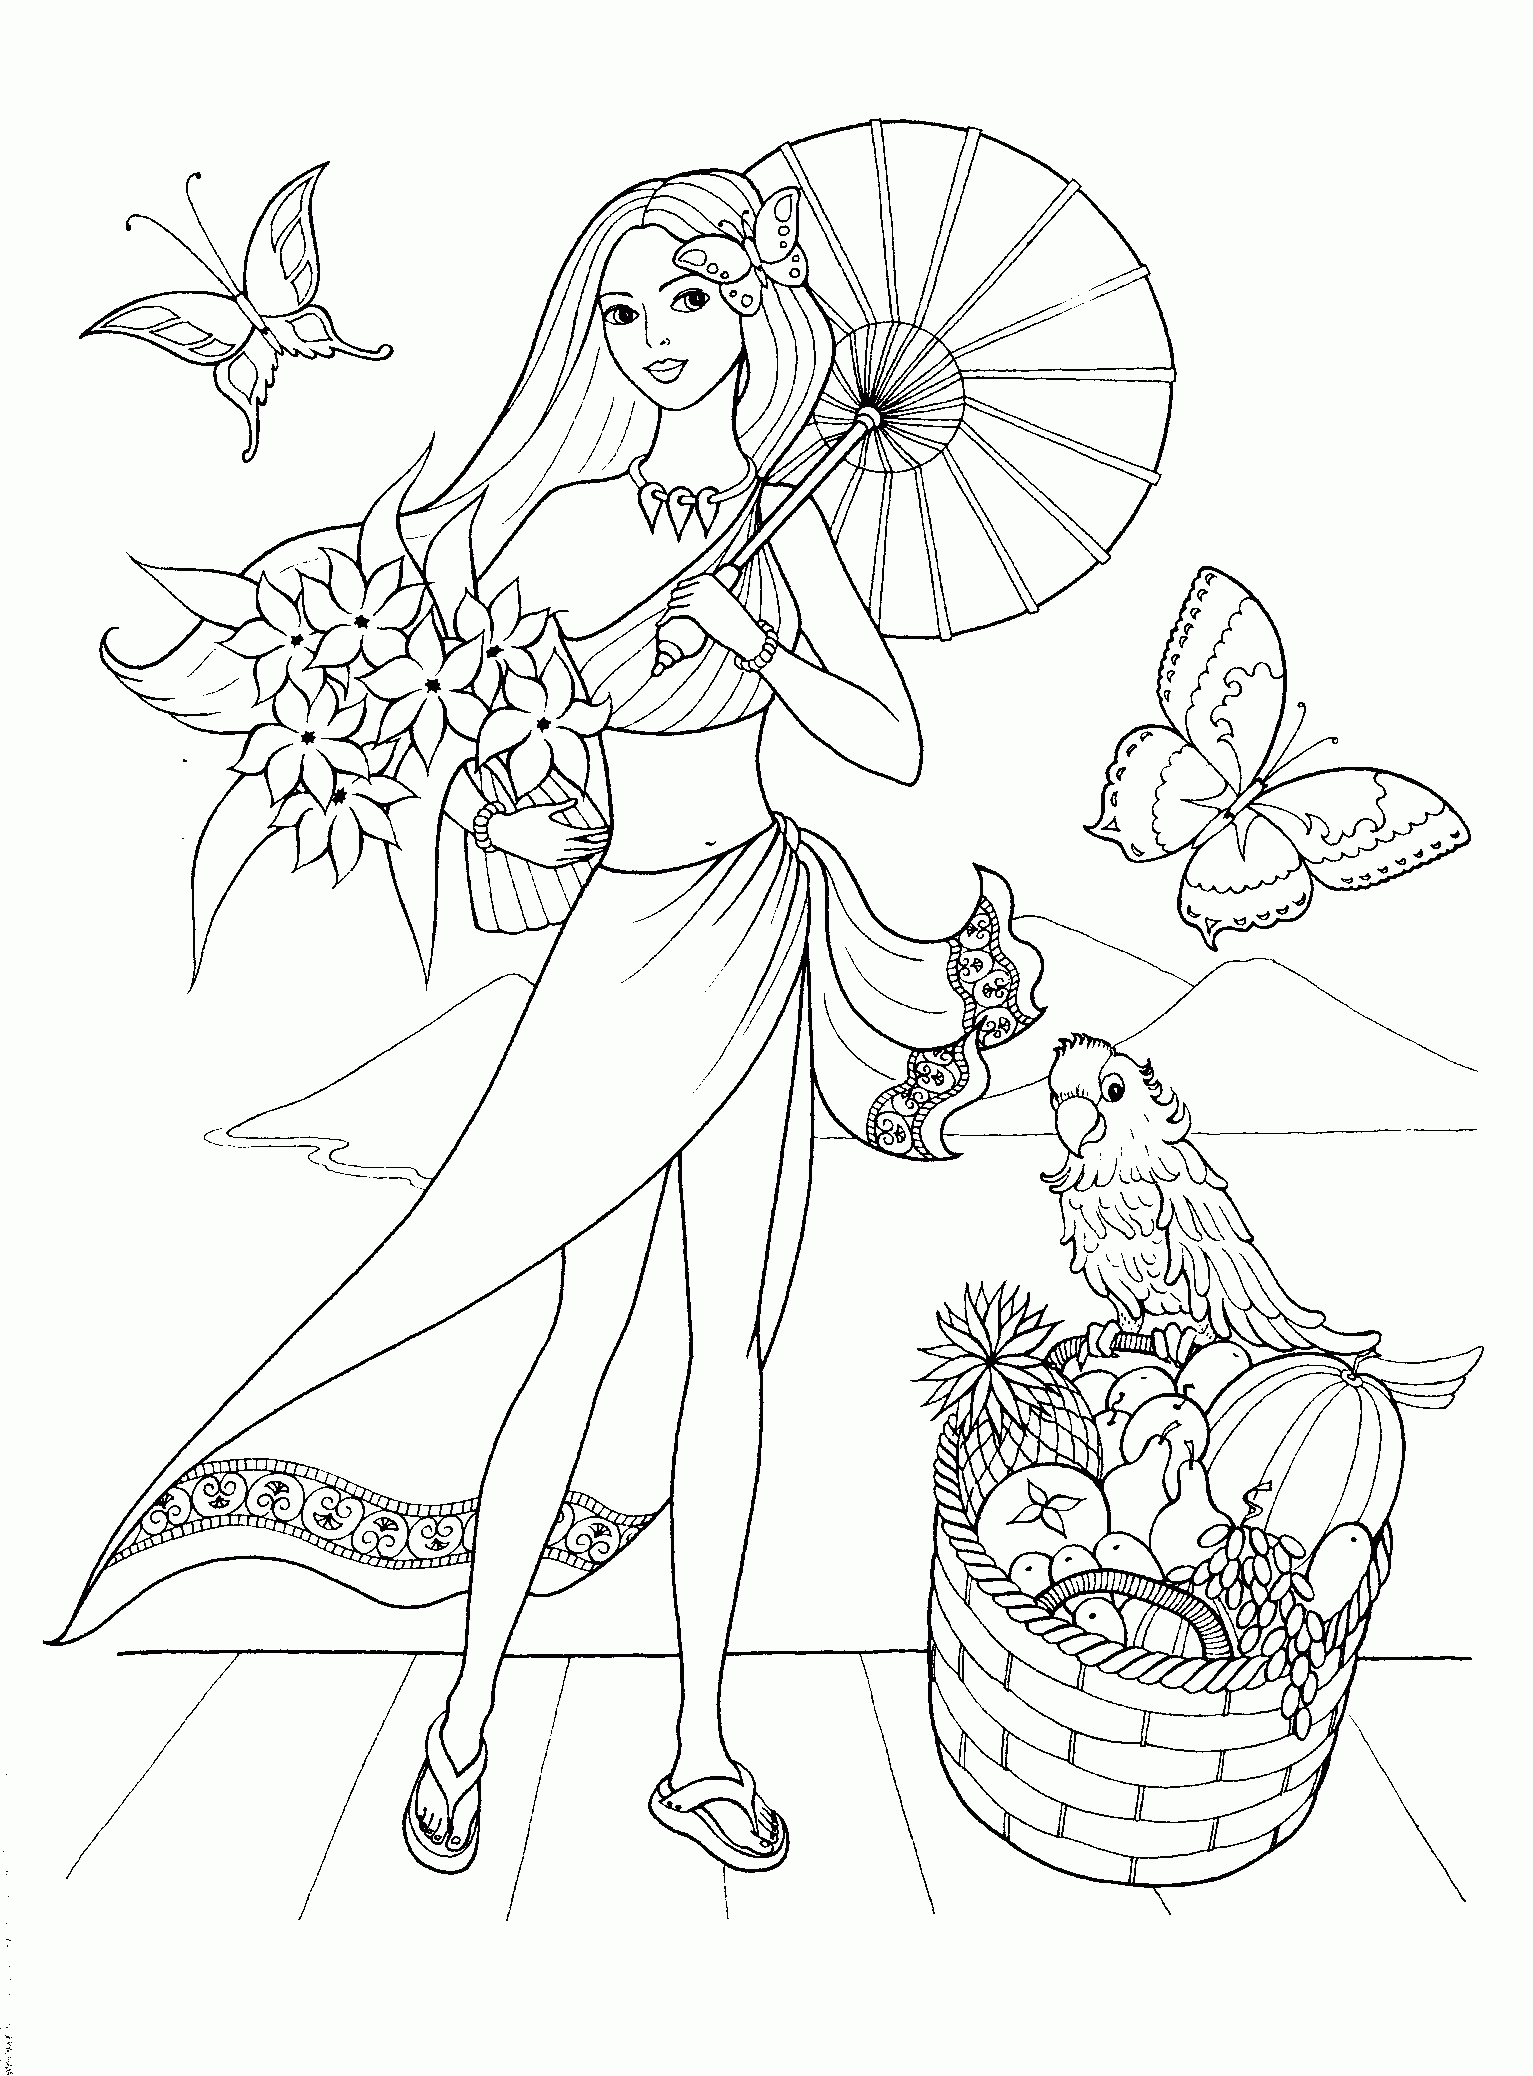 Fashion Coloring Pages | Fashionable Girls Coloring Pages 1 - Free Printable Coloring Pages For Girls